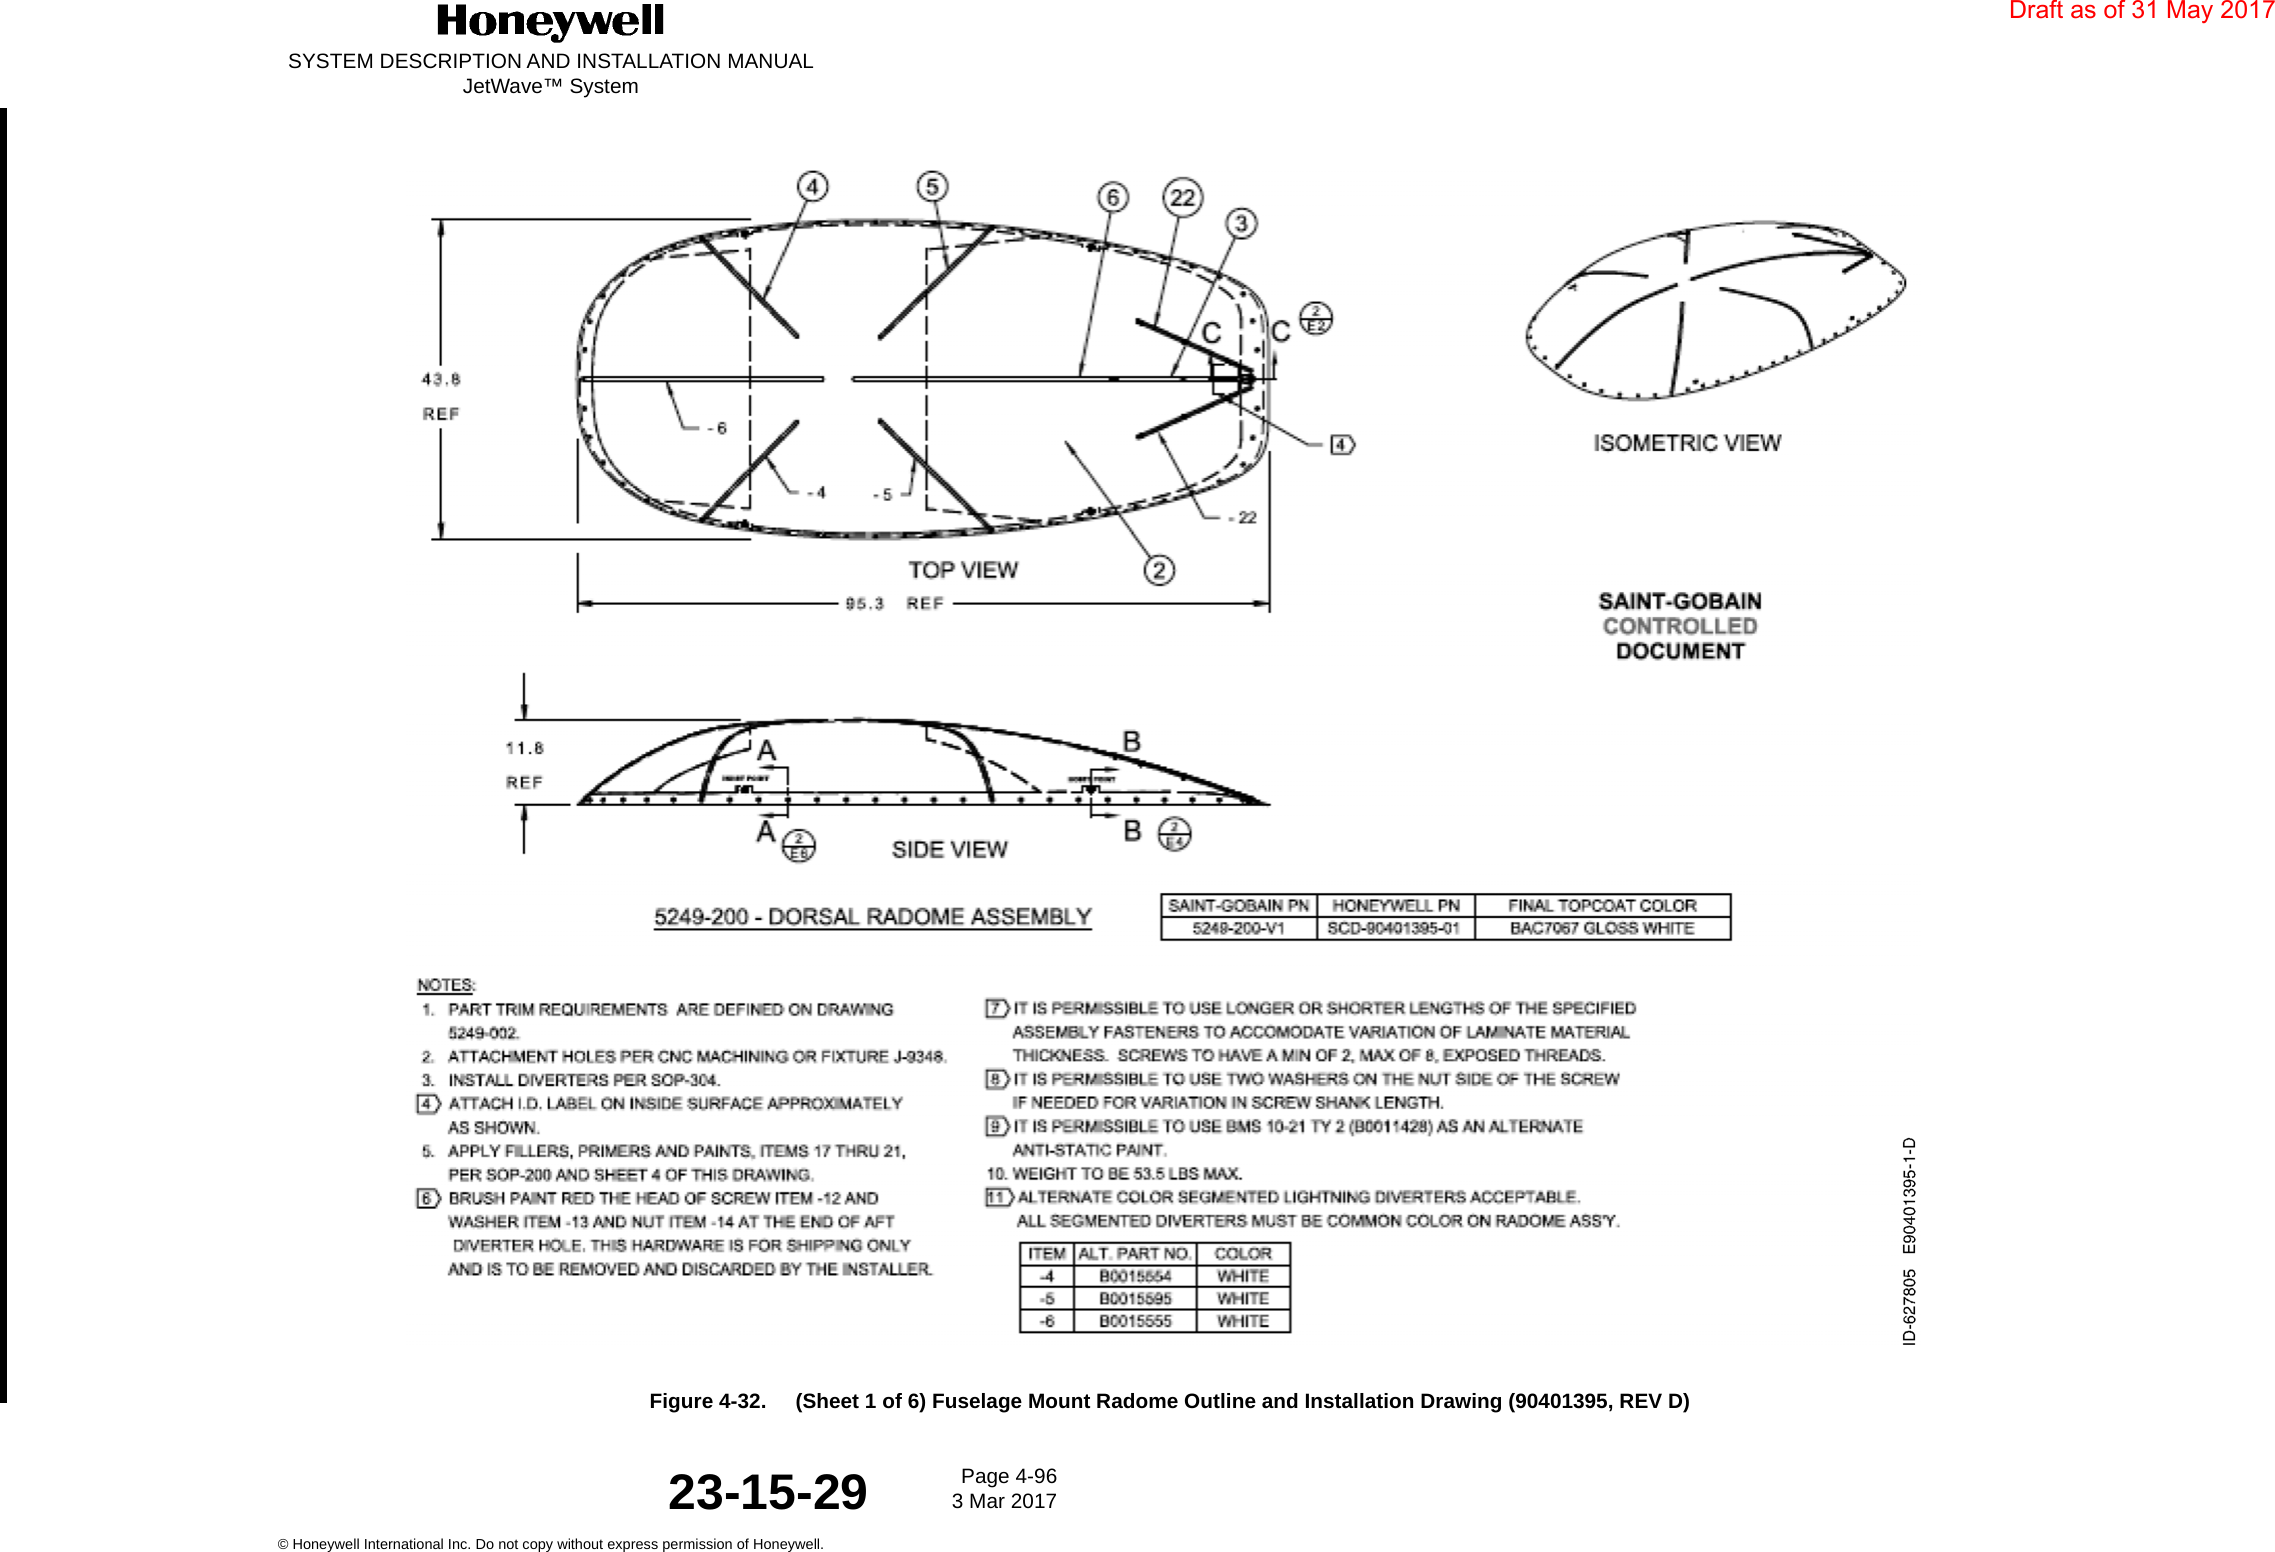 SYSTEM DESCRIPTION AND INSTALLATION MANUALJetWave™ SystemPage 4-96 3 Mar 2017© Honeywell International Inc. Do not copy without express permission of Honeywell.23-15-29Figure 4-32.     (Sheet 1 of 6) Fuselage Mount Radome Outline and Installation Drawing (90401395, REV D)Draft as of 31 May 2017